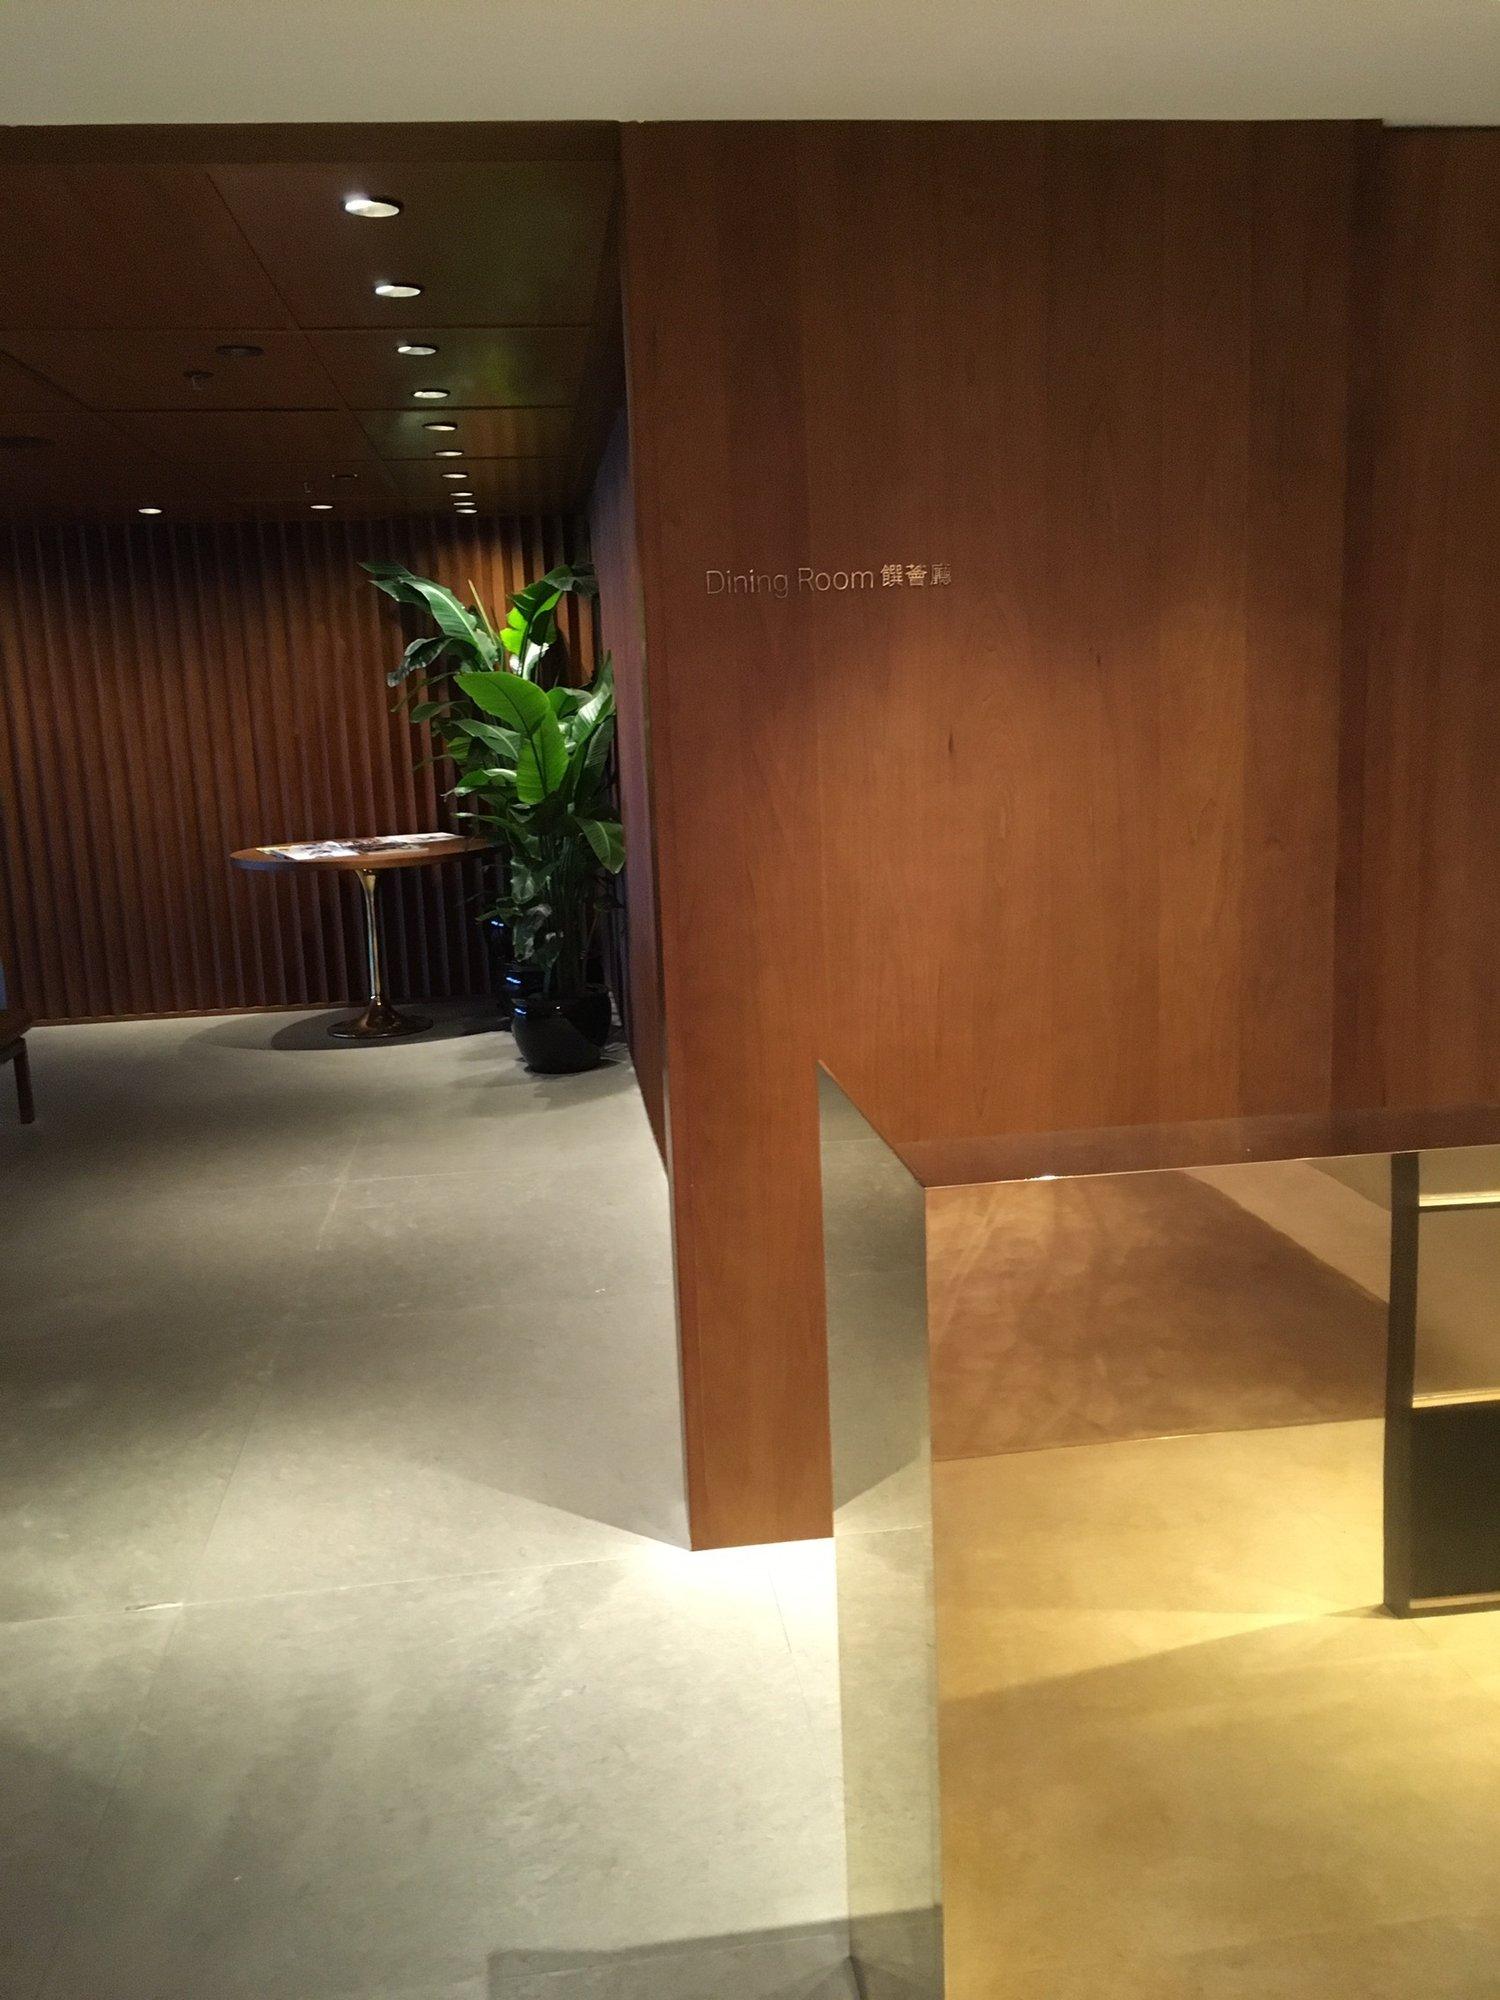 Cathay Pacific The Pier First Class Lounge image 78 of 100